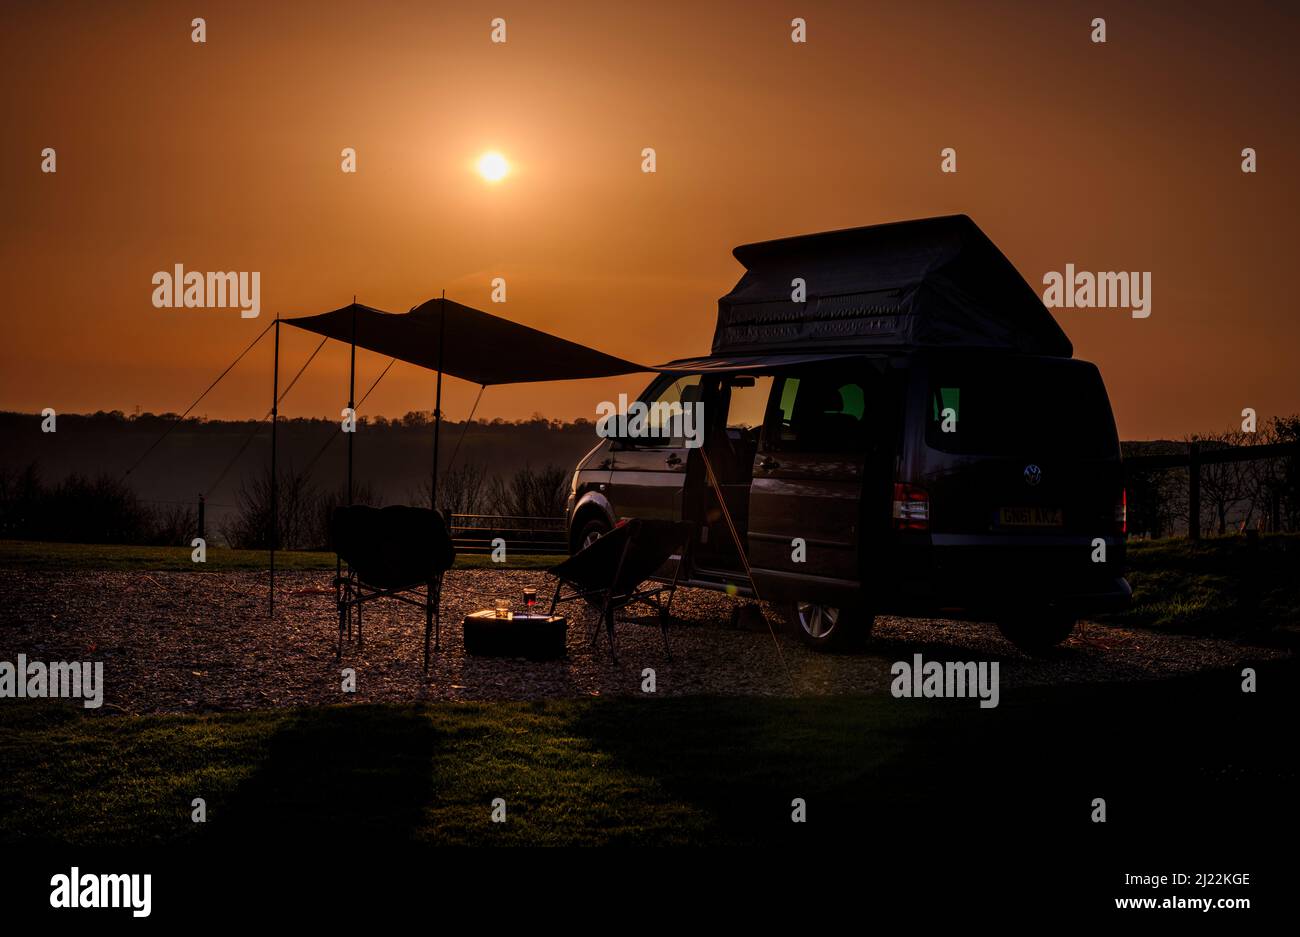 Sunset on the South Downs at Bow Hill Farm. UK camping vanlife with a VW T5 camper van and awning. Stock Photo